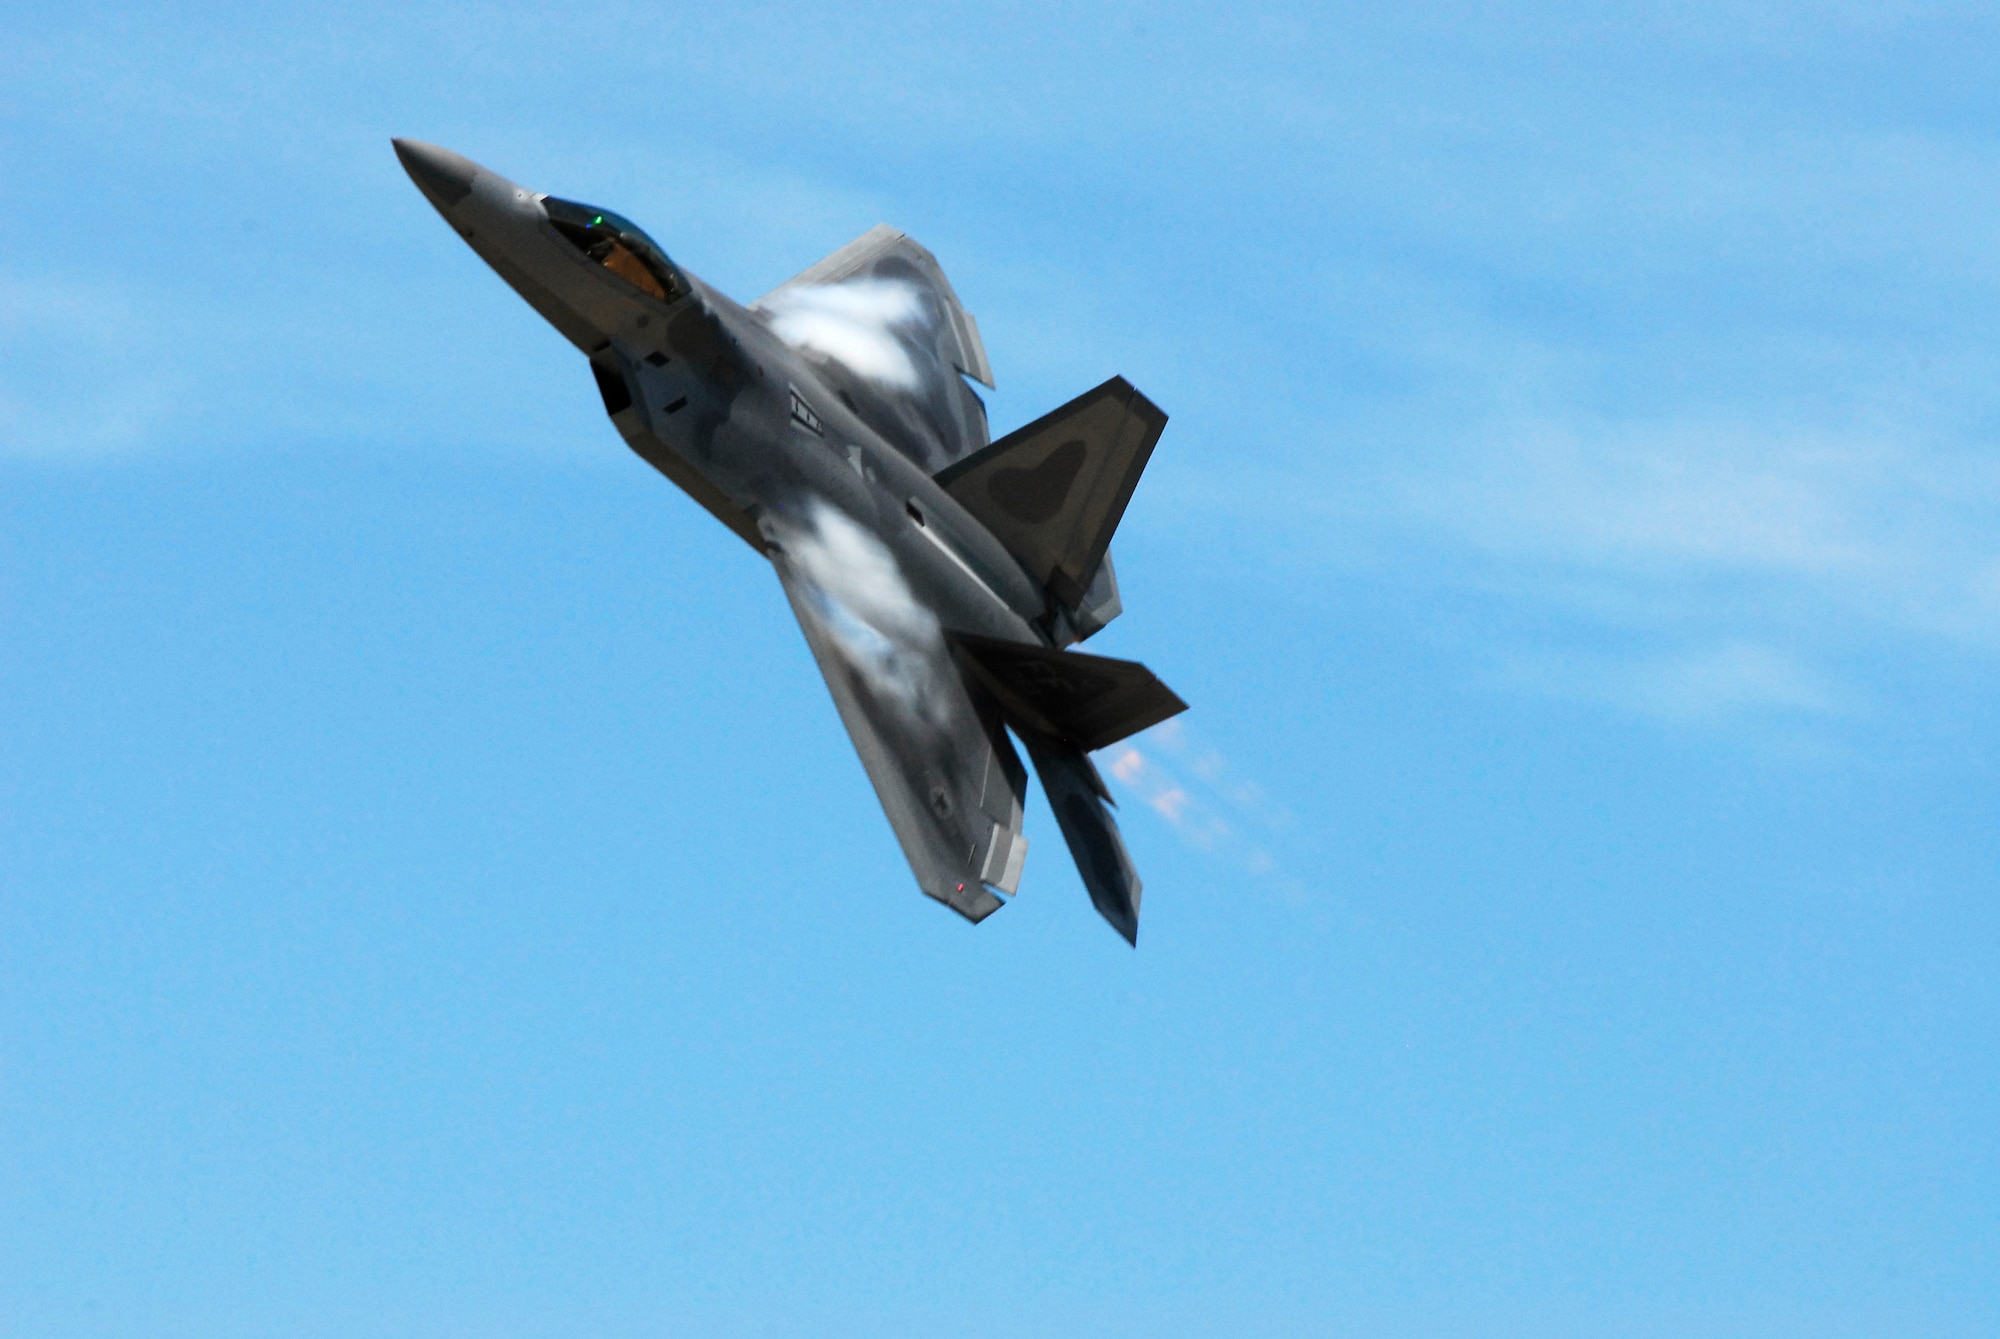 SIOUX FALLS, S.D. -- One of two F-22 Raptors from the United States Air Force F-22 Raptor demonstration team maneuvers for a smooth landing at Joe Foss Field here during their arrival July 23 in support of the Sioux Falls Airshow. (U.S. Air Force photo by Staff Sgt. Quinton Young)